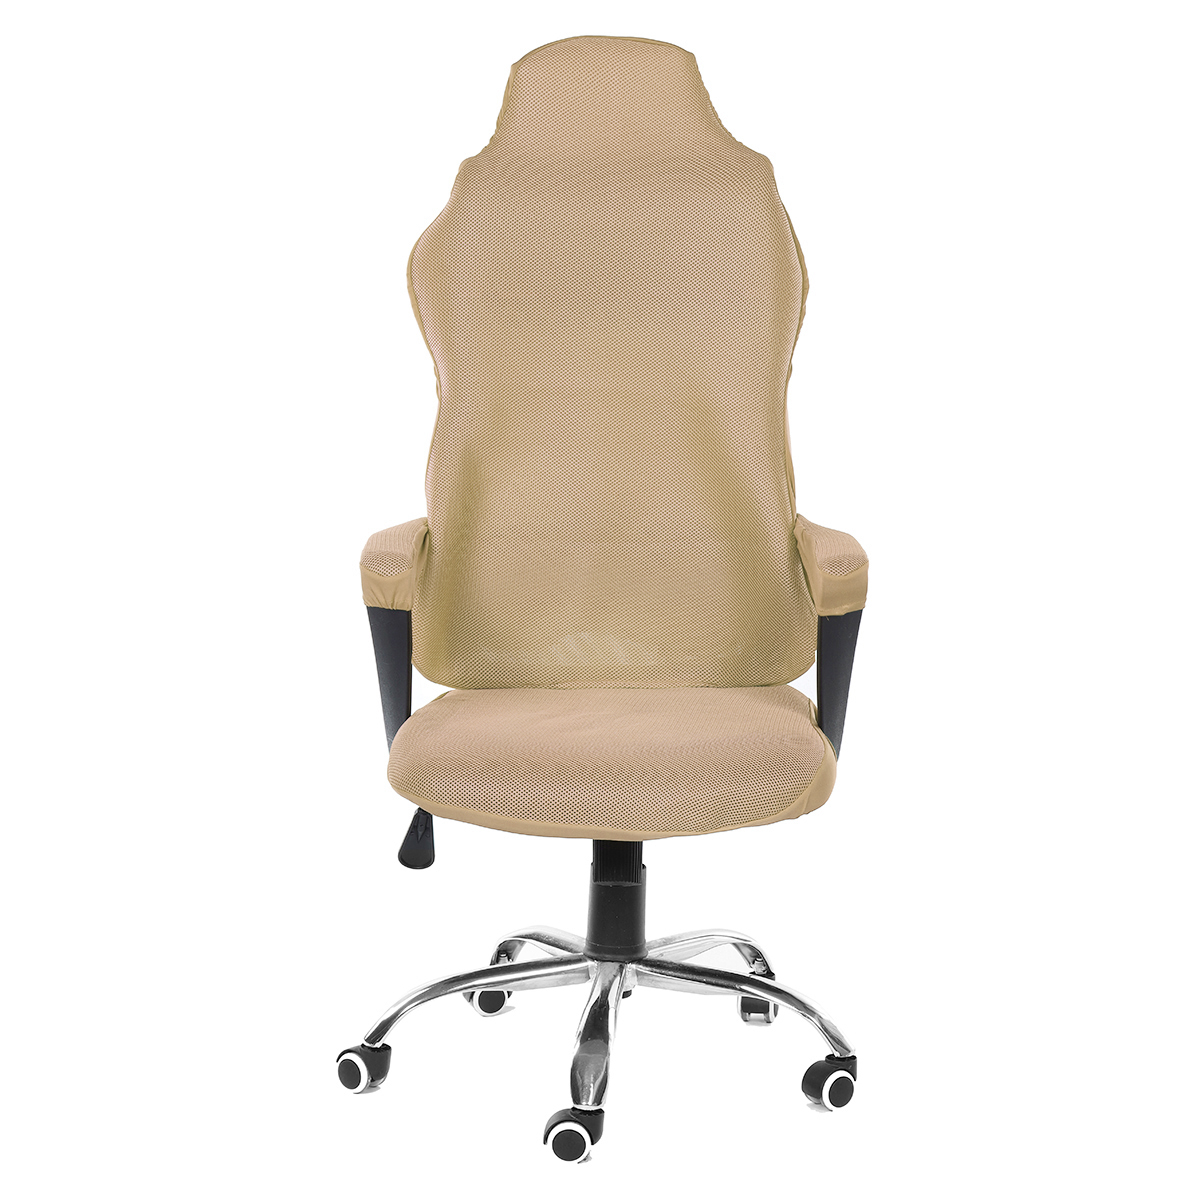 Mesh-Gaming-Chair-Elastic-Chair-Cover-Office-Chair-Dustproof-Chair-Cover-Home-Office-Solid-Color-Cha-1827333-3